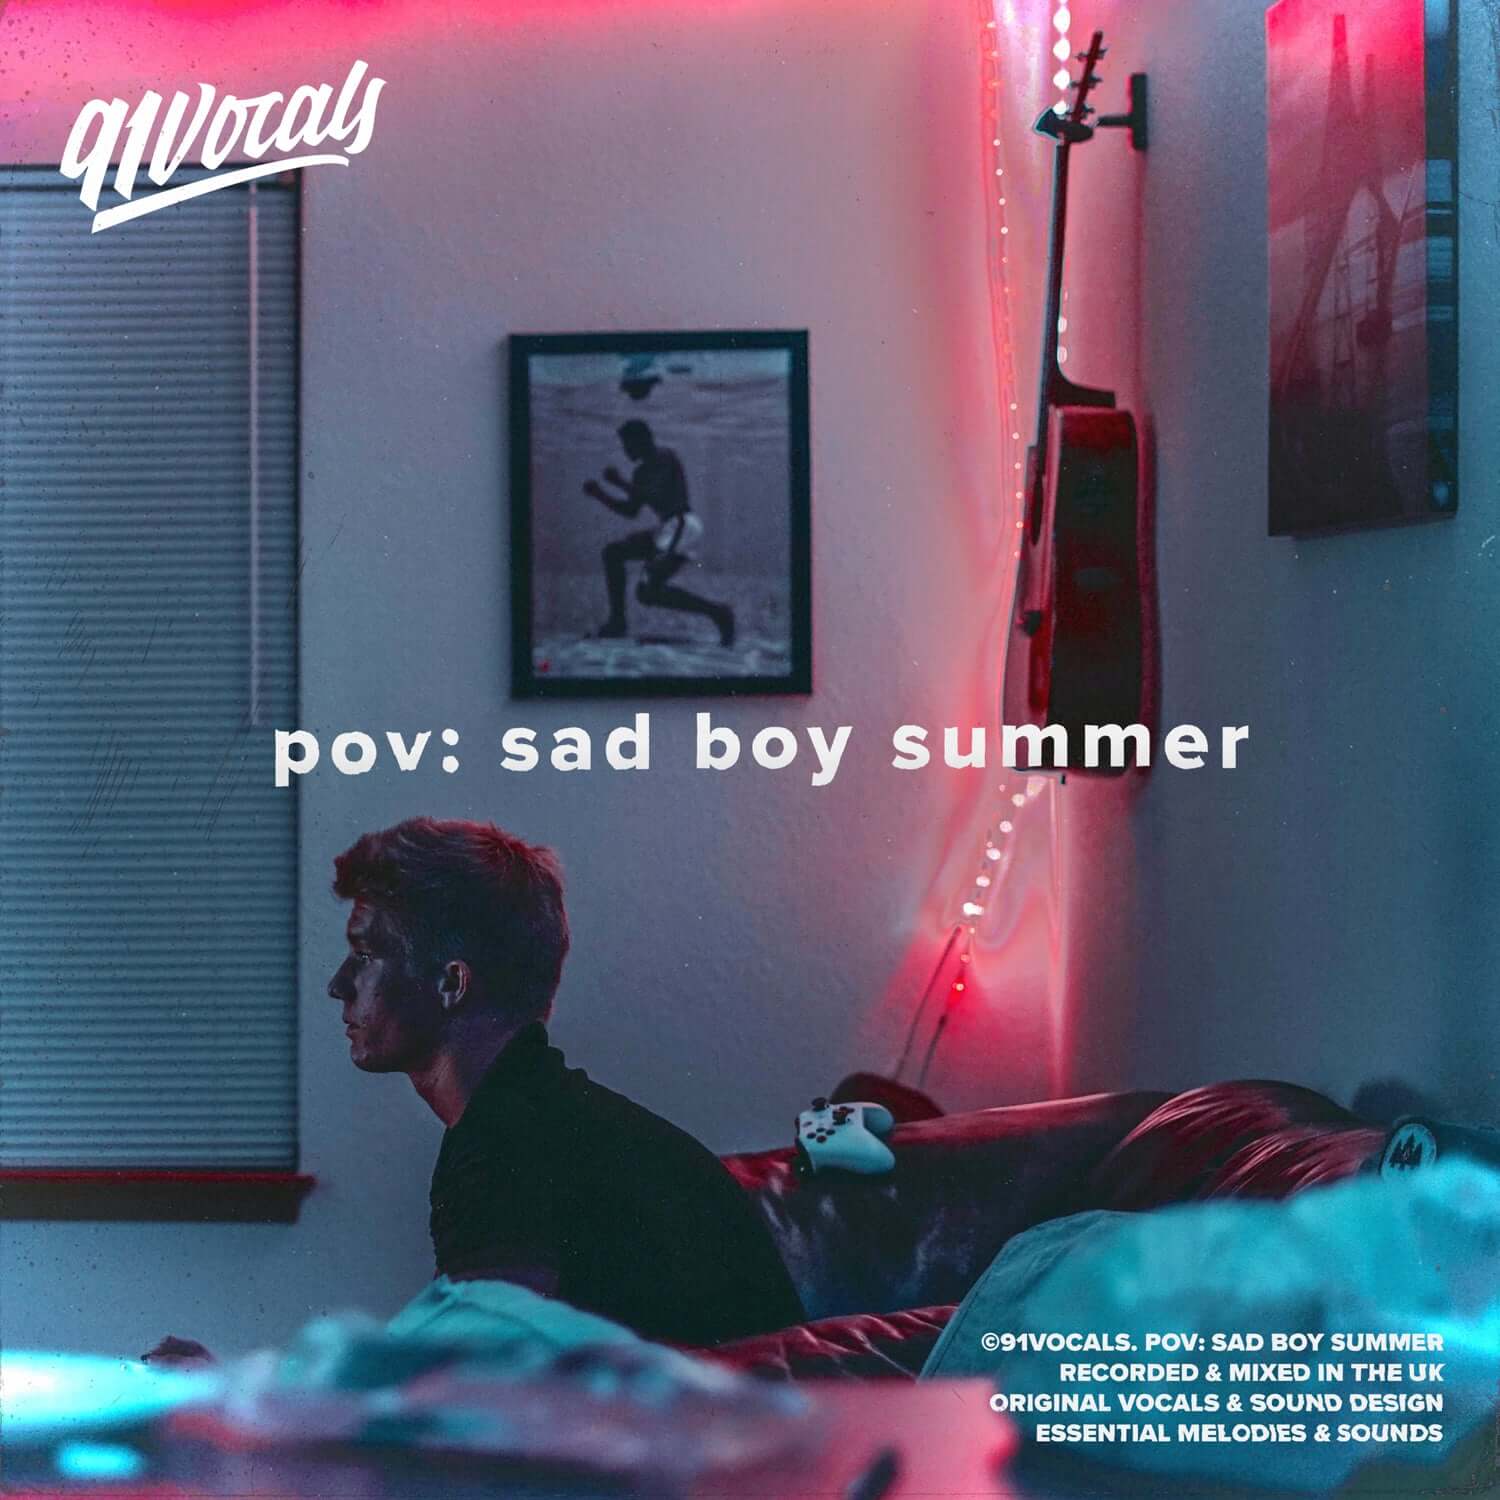 Stream sad boy music  Listen to songs, albums, playlists for free